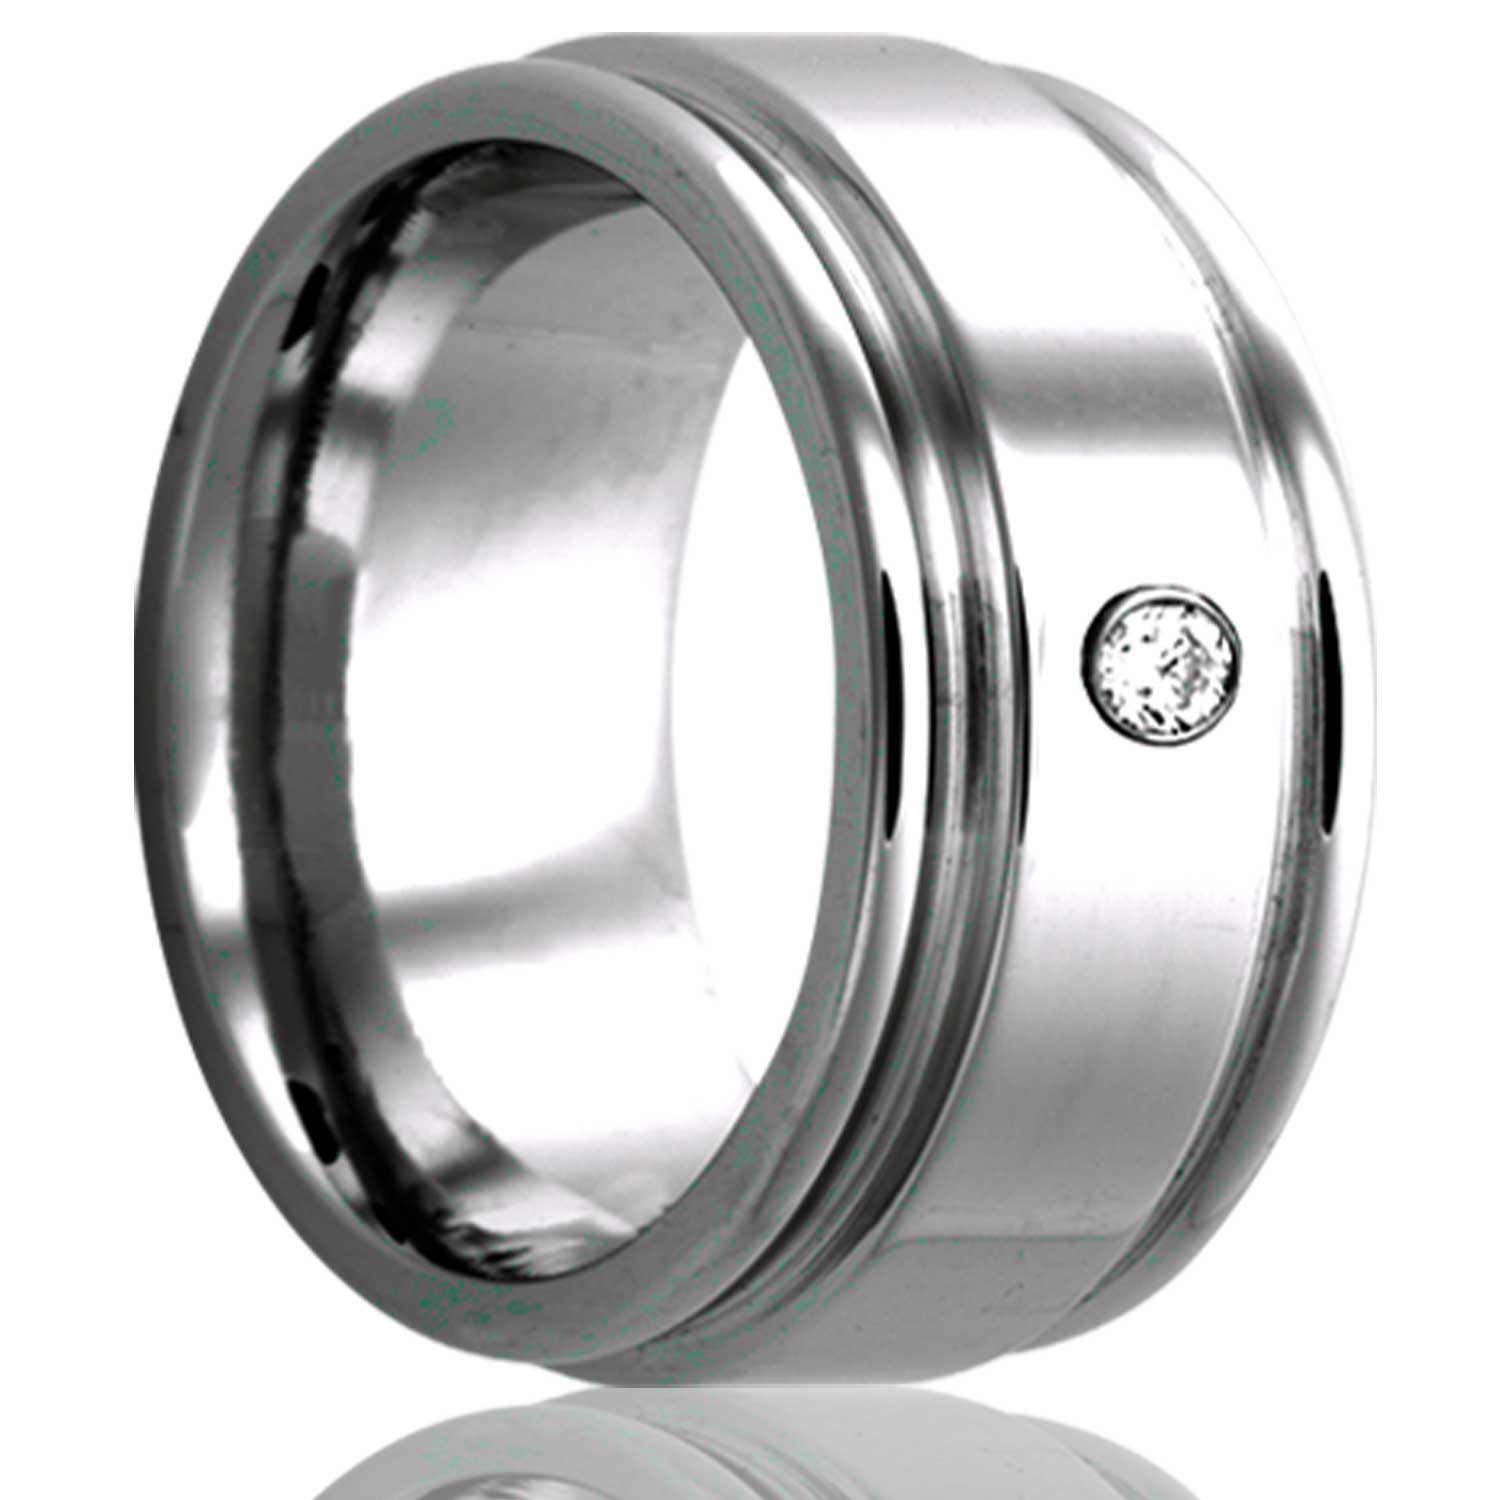 A cobalt wedding band with dual grooves & diamond displayed on a neutral white background.